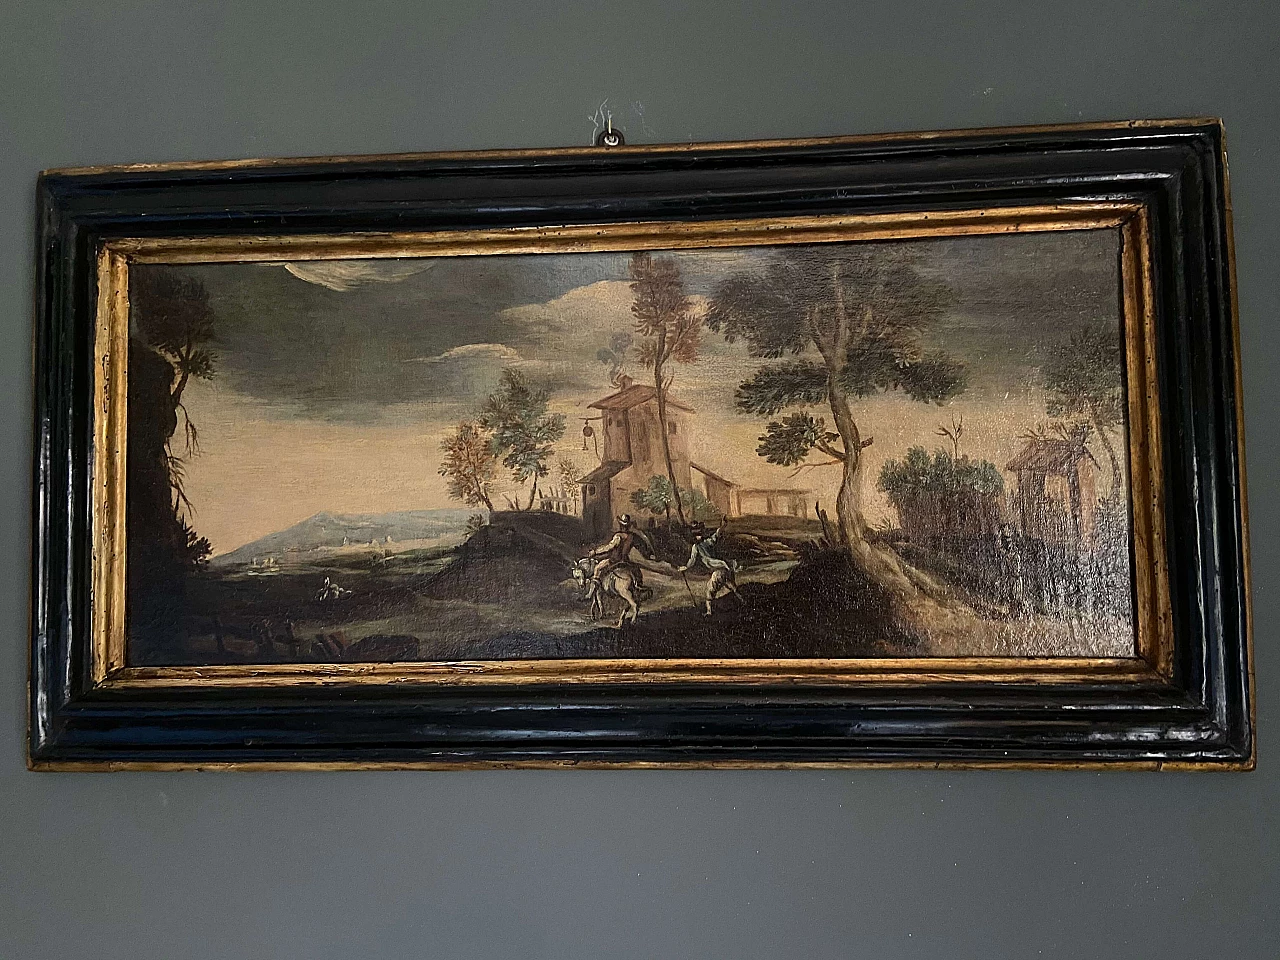 Second of a pair of Italian paintings with landscapes, 17th century 1175361